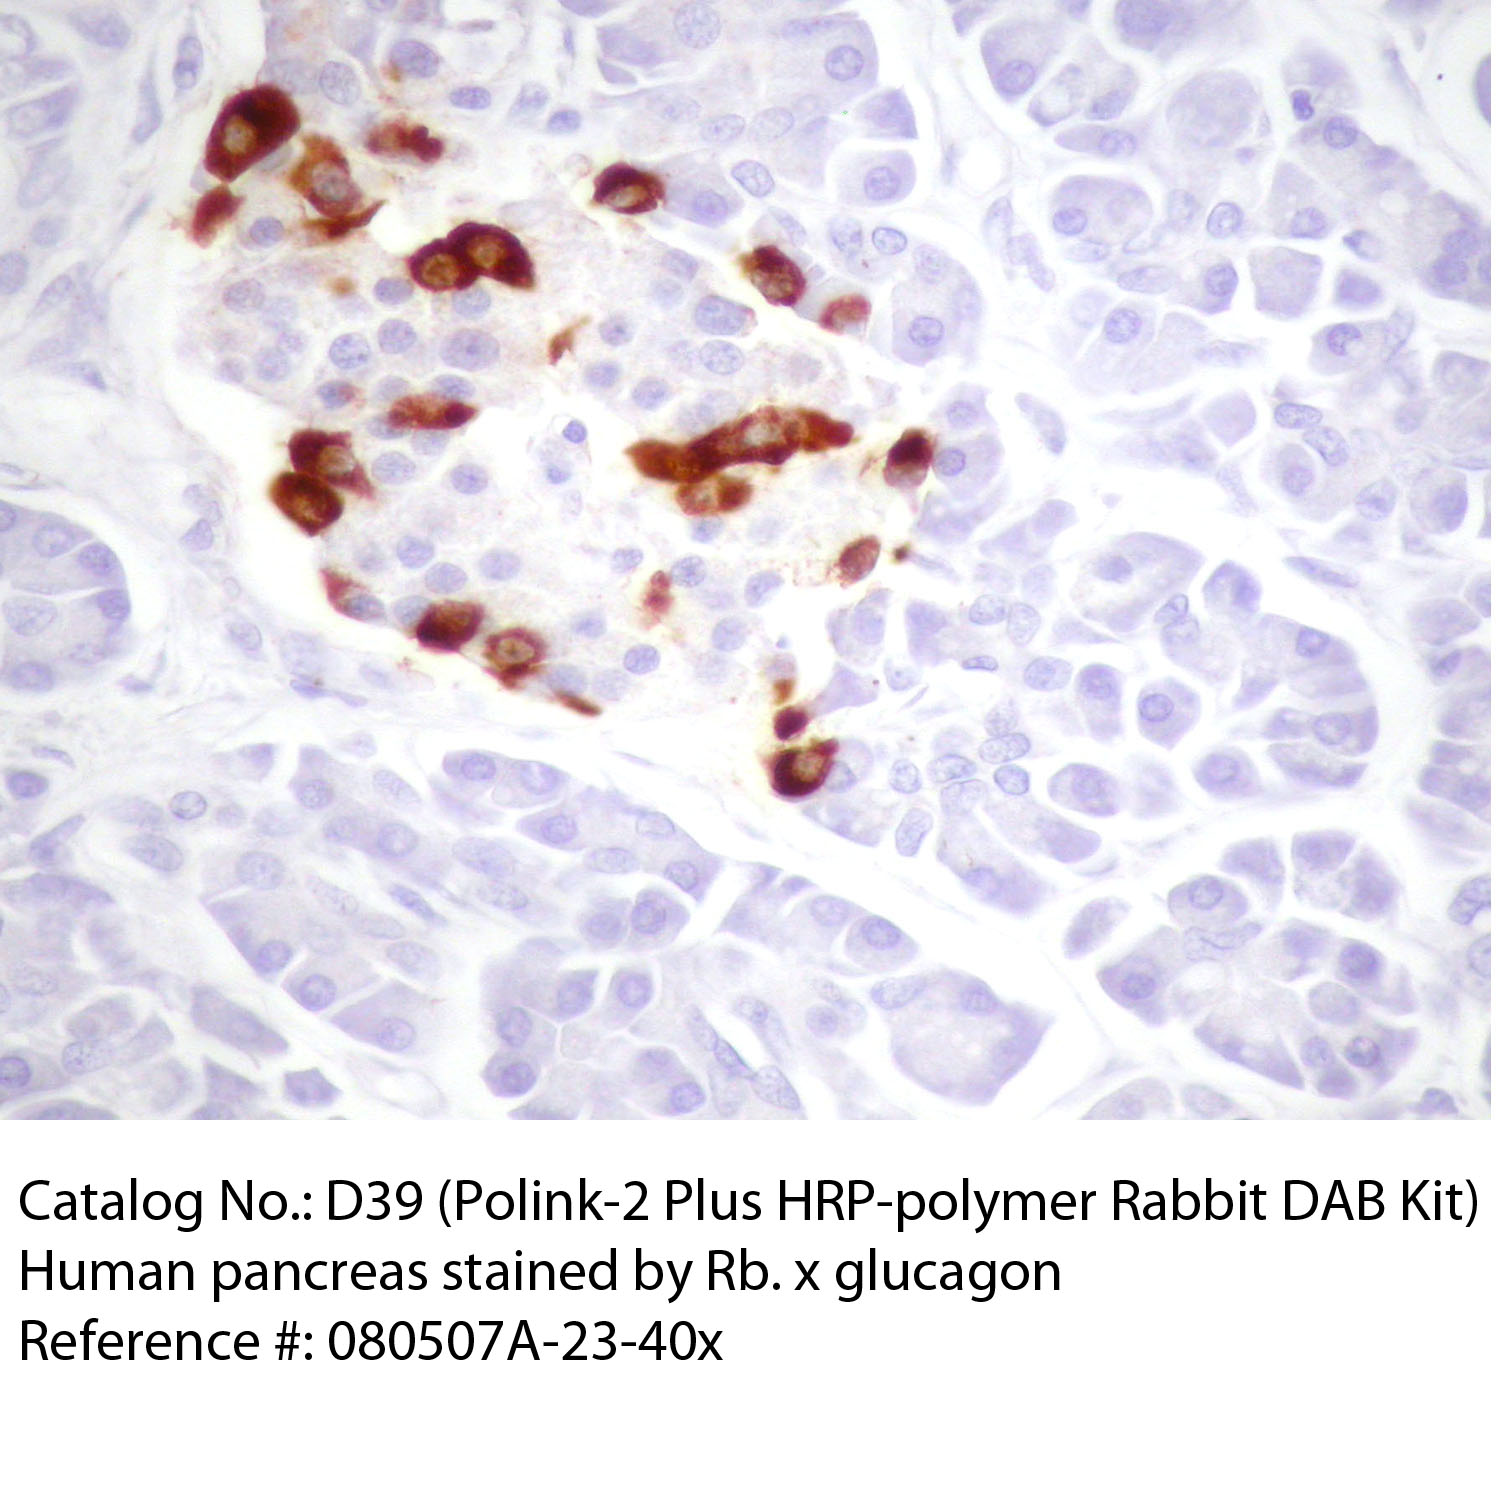 IHC staining of FFPE human pancreas tissue within normal limits using rabbit anti-glucagon polyclonal antibody and Polink-2 Plus HRP Rabbit for DAB detection kit [D39-18]. The brown stain indicates positive stain and blue is the counter stain. It is mounted using a permanent organic mounting medium [E37-100].